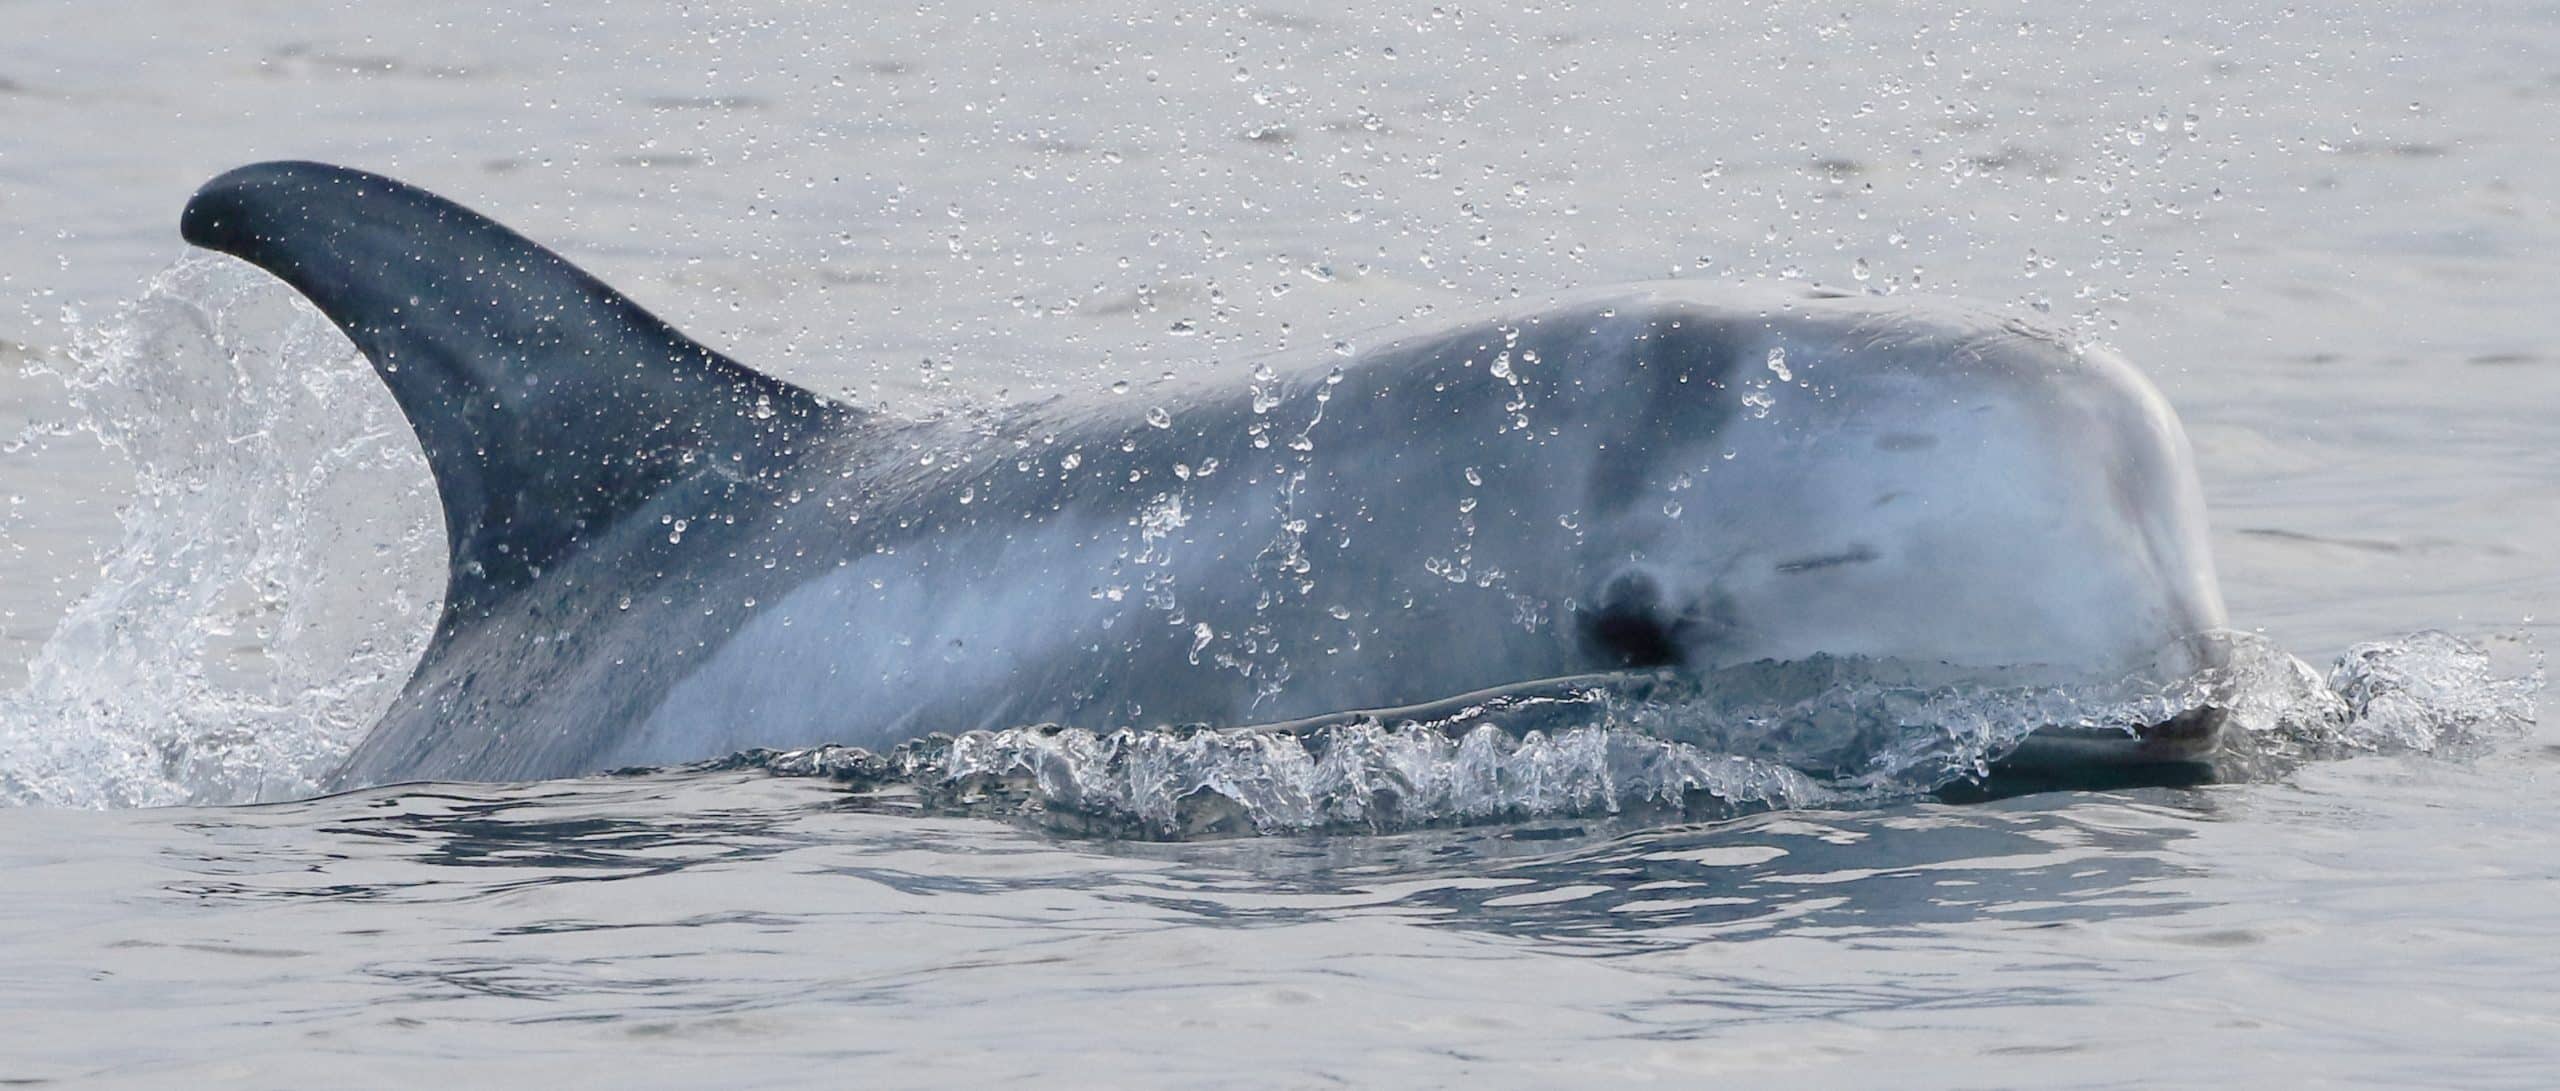 Risso's dolphin at surface